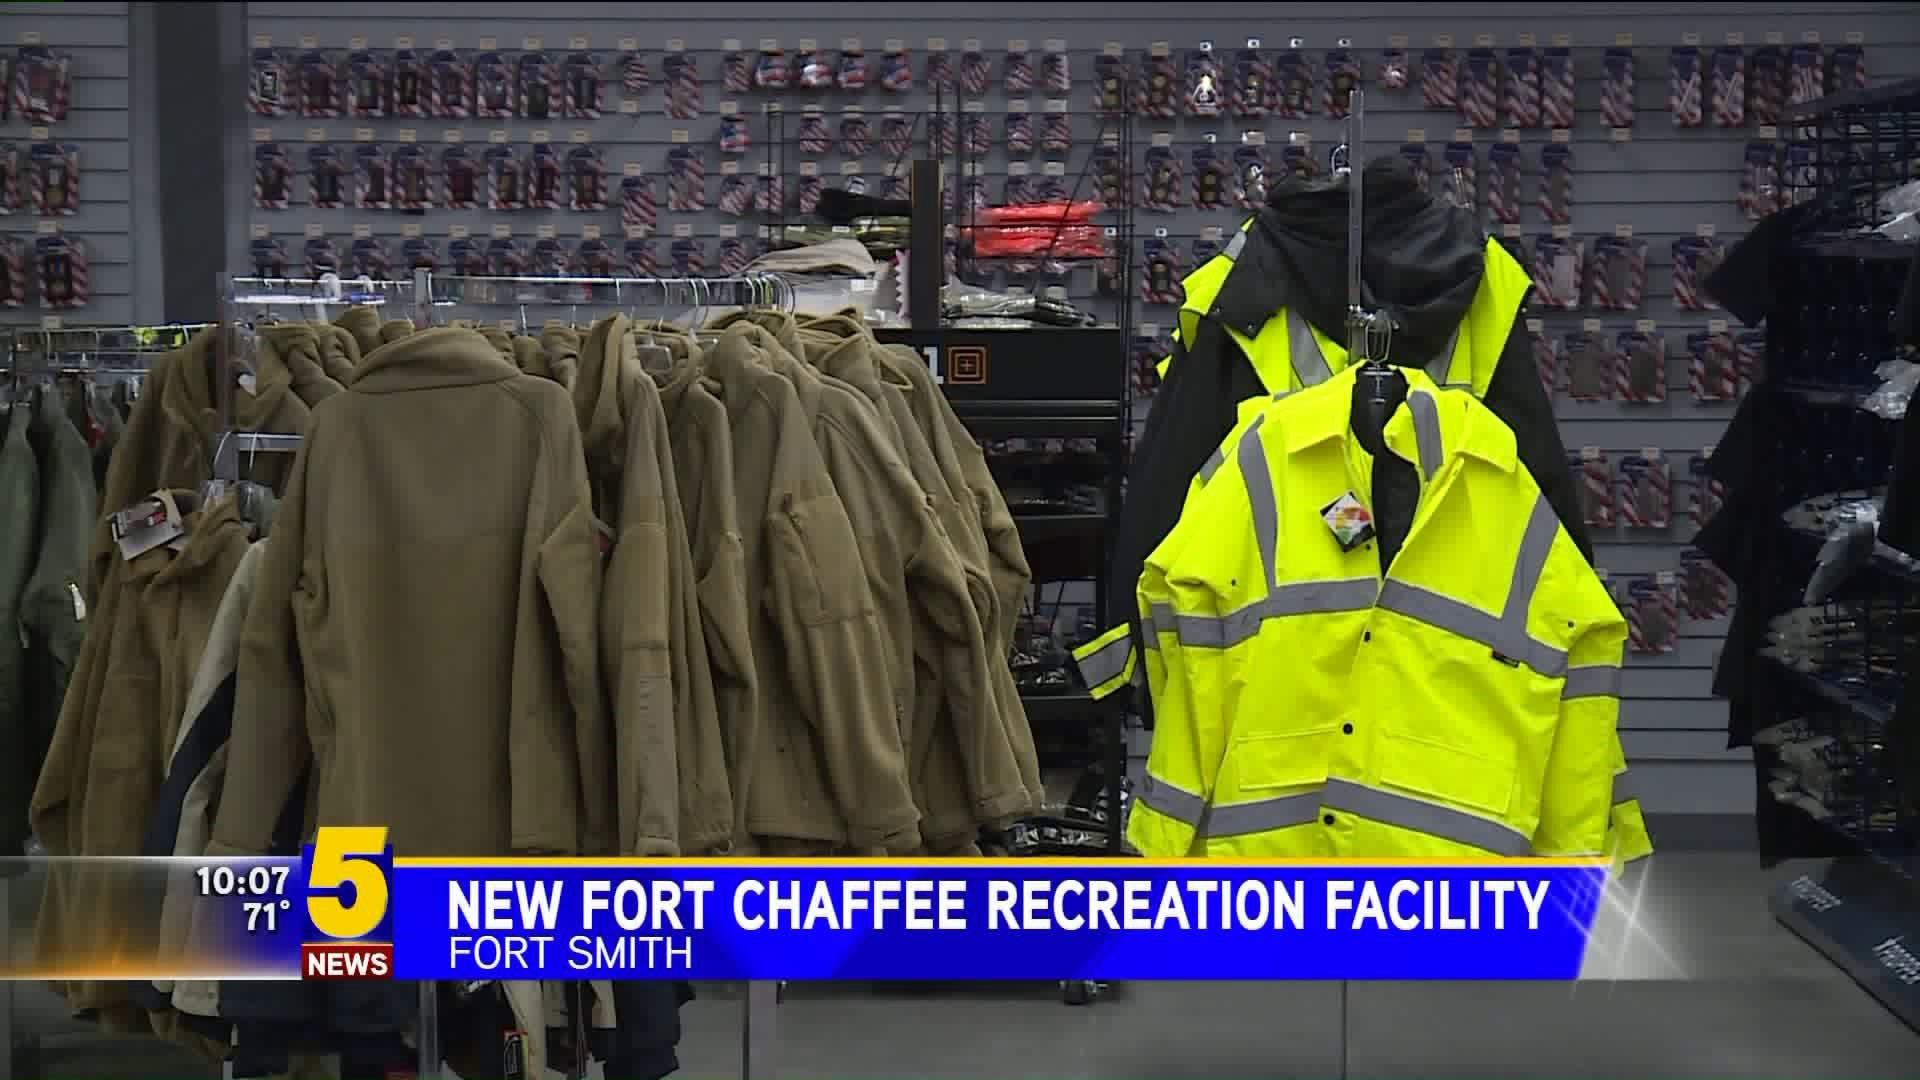 Fort Chaffee Recreation Facility